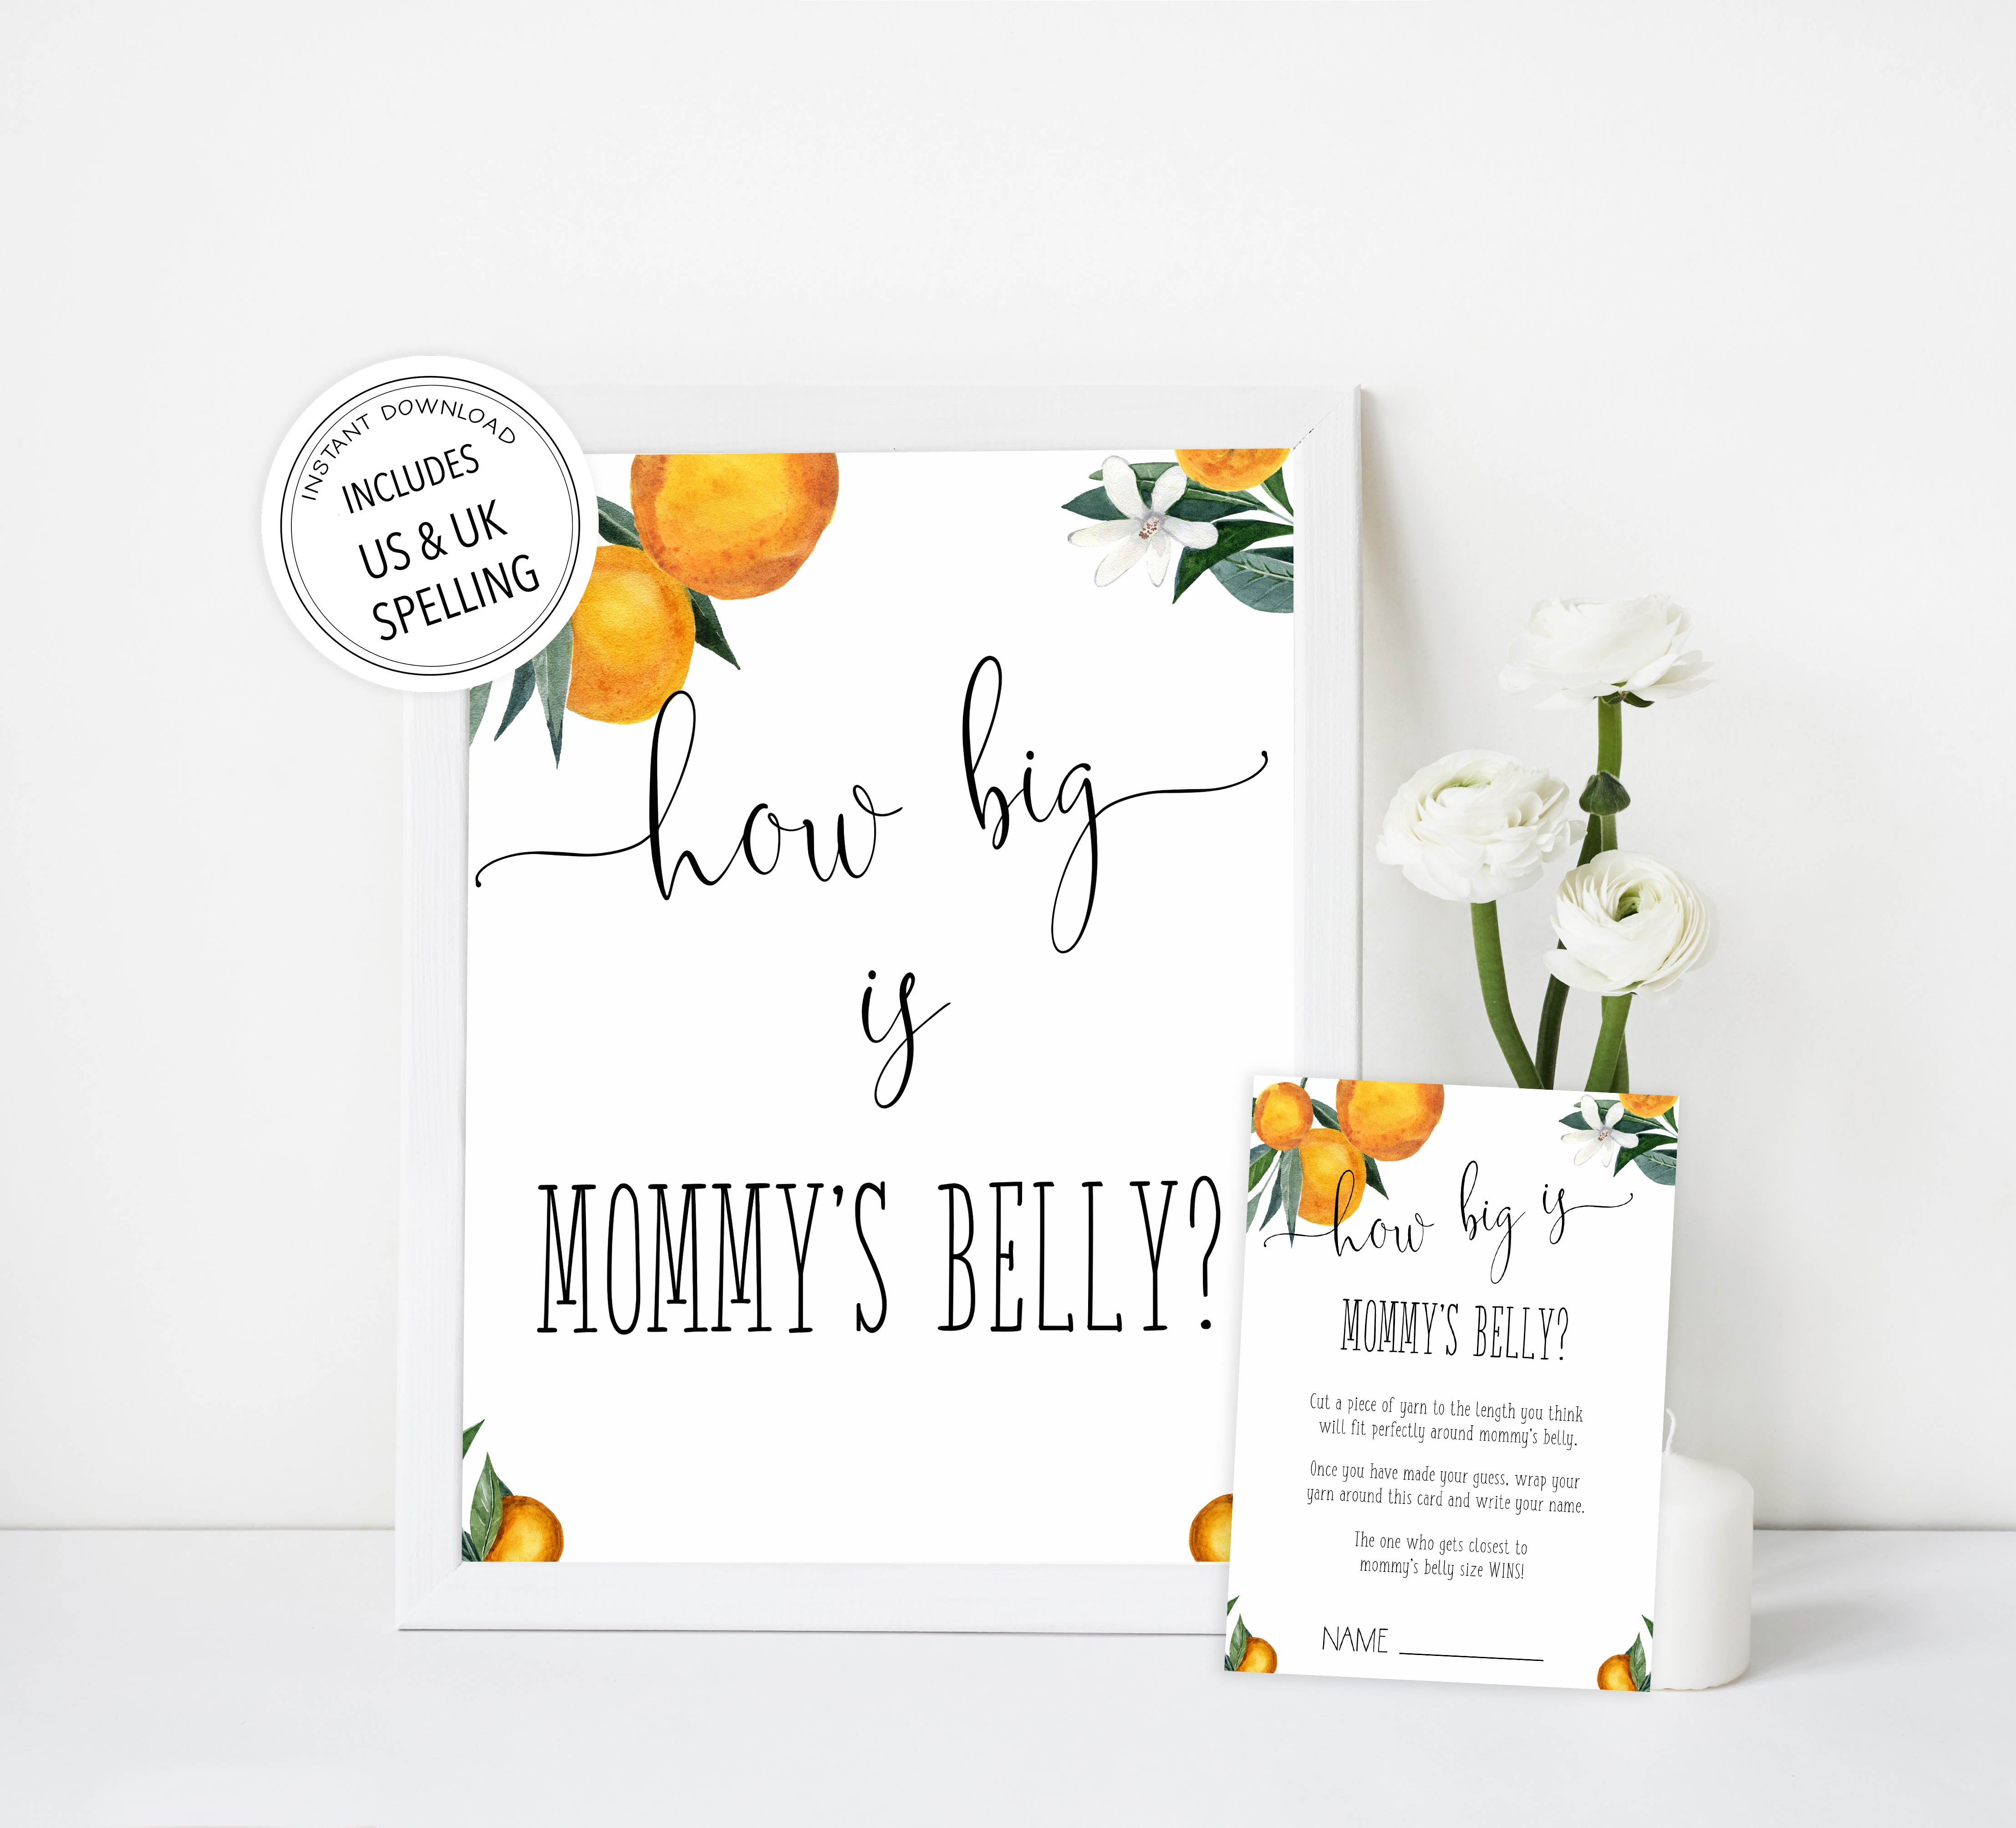 how big is mommys belly baby game, Printable baby shower games, little cutie baby games, baby shower games, fun baby shower ideas, top baby shower ideas, little cutie baby shower, baby shower games, fun little cutie baby shower ideas, citrus baby shower games, citrus baby shower, orange baby shower